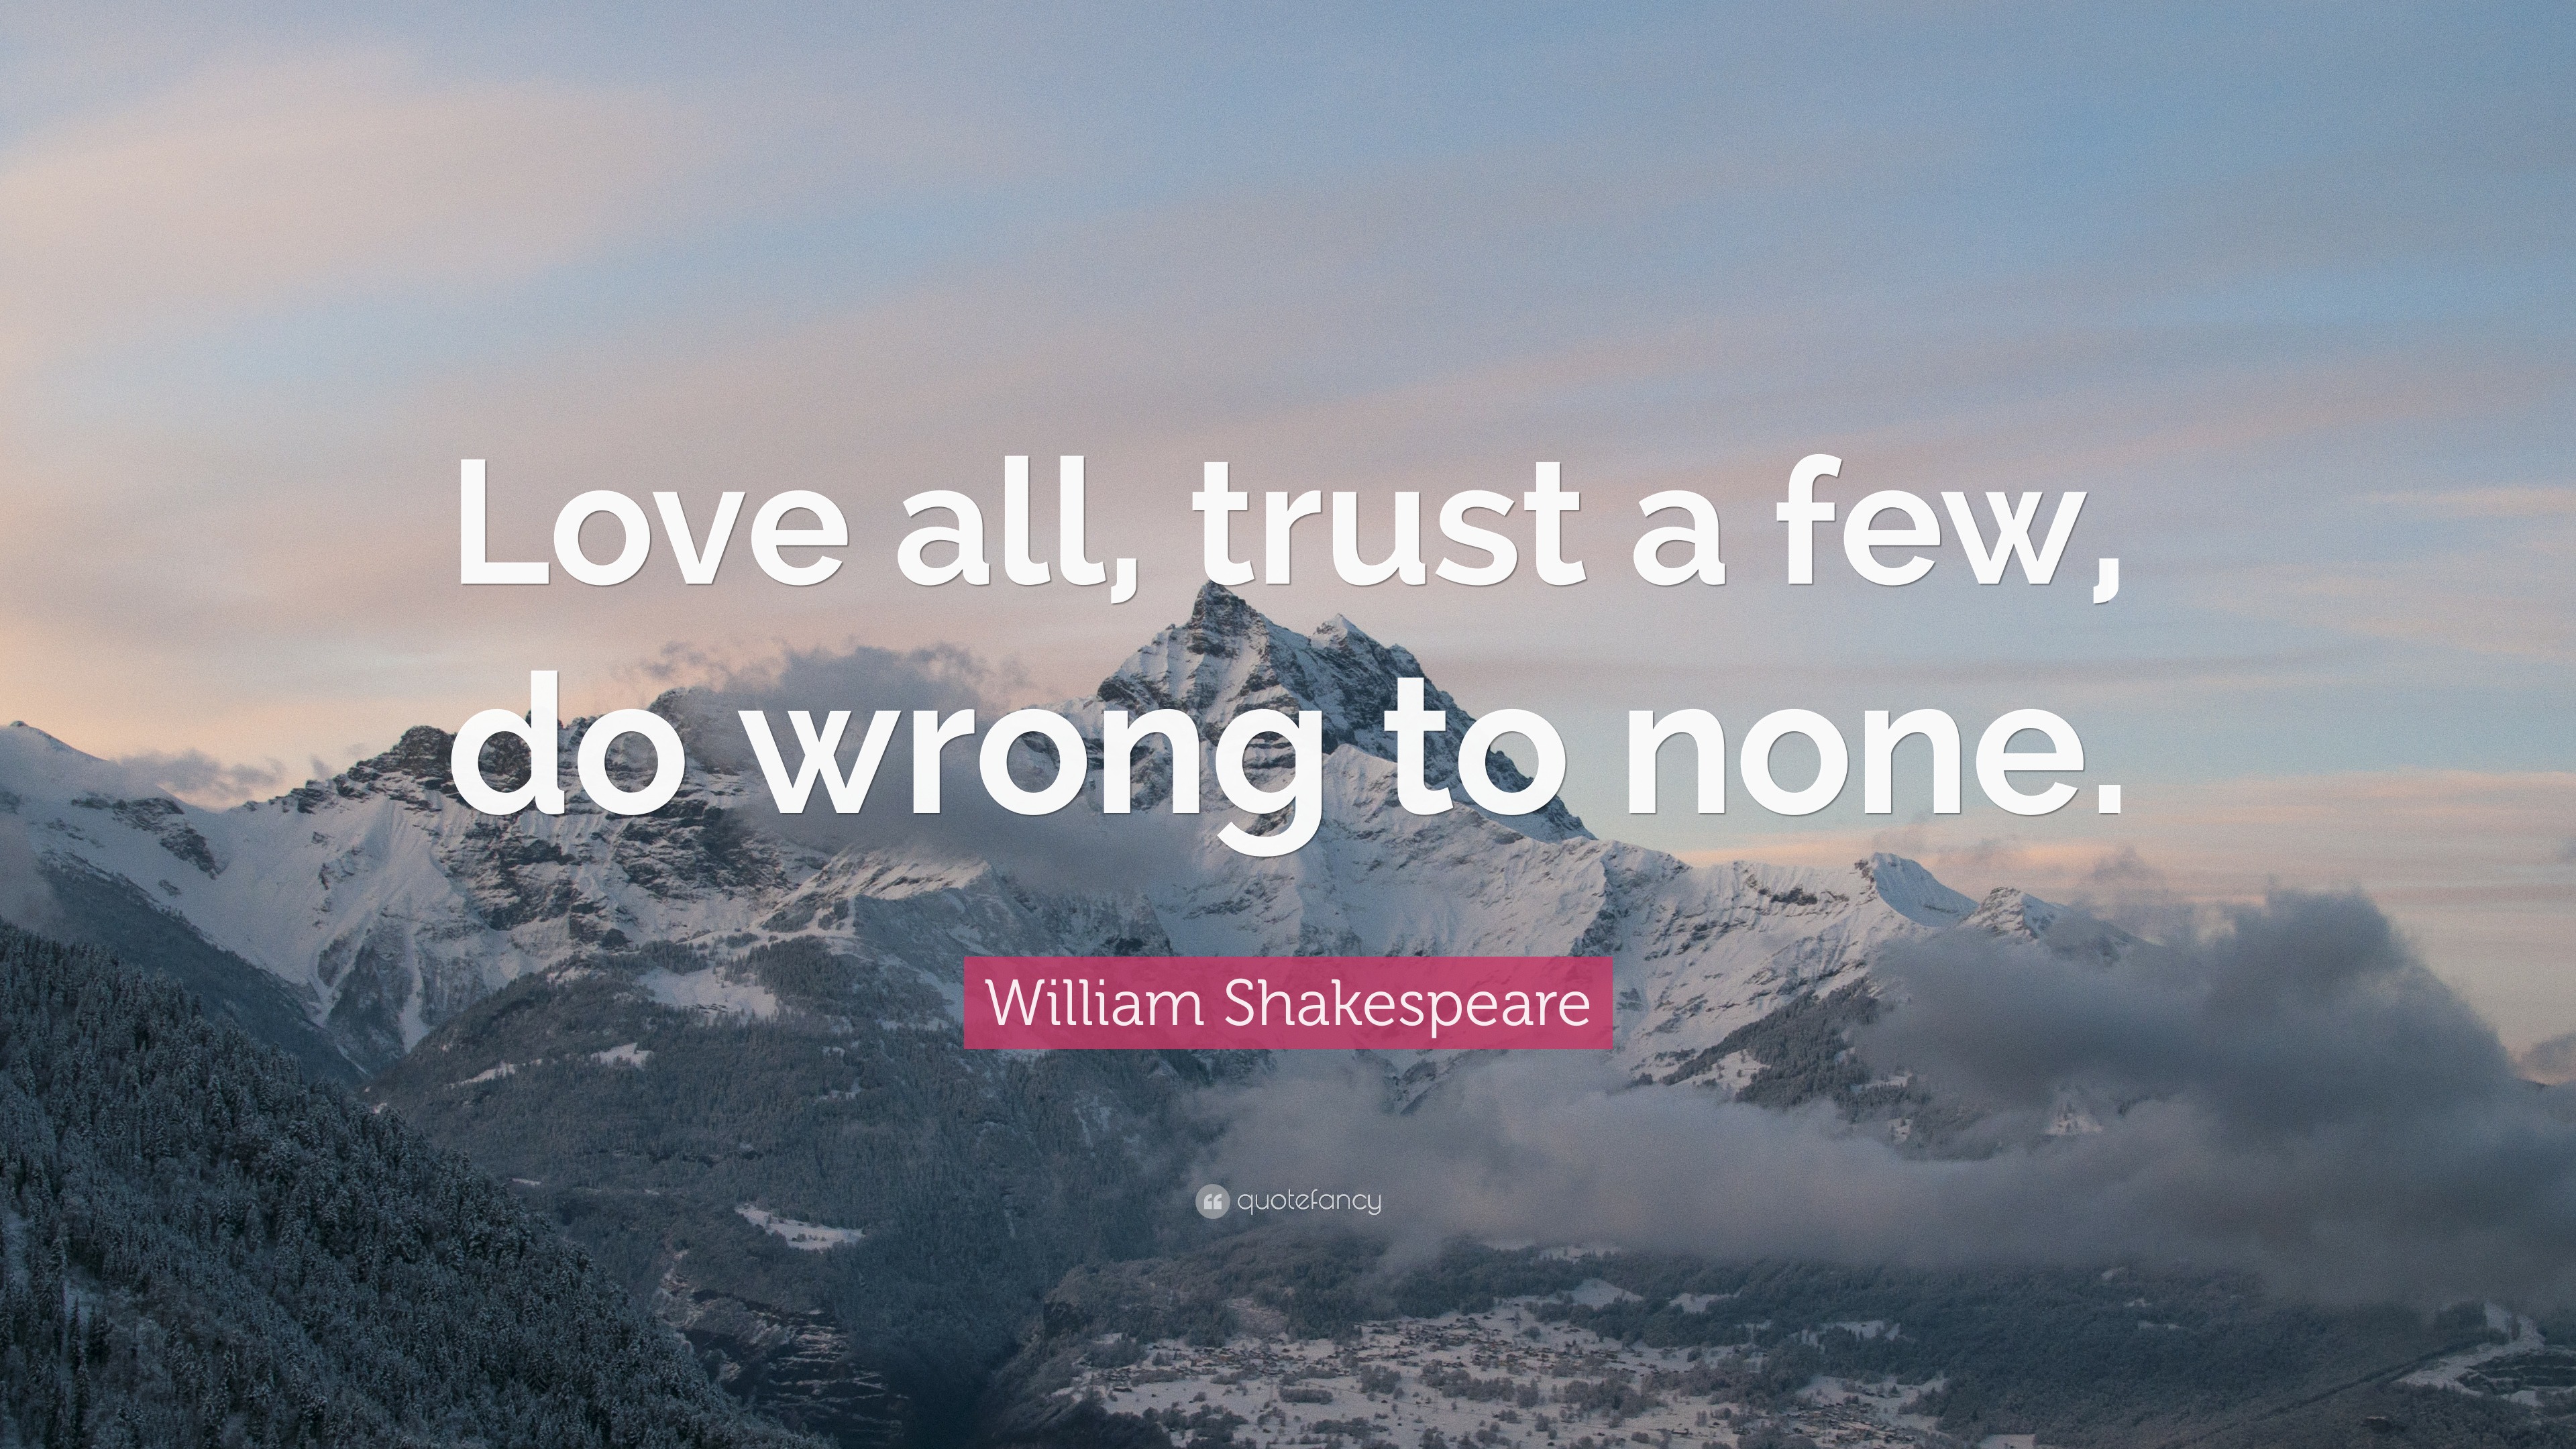 William Shakespeare Quote: “Love all, trust a few, do wrong to none